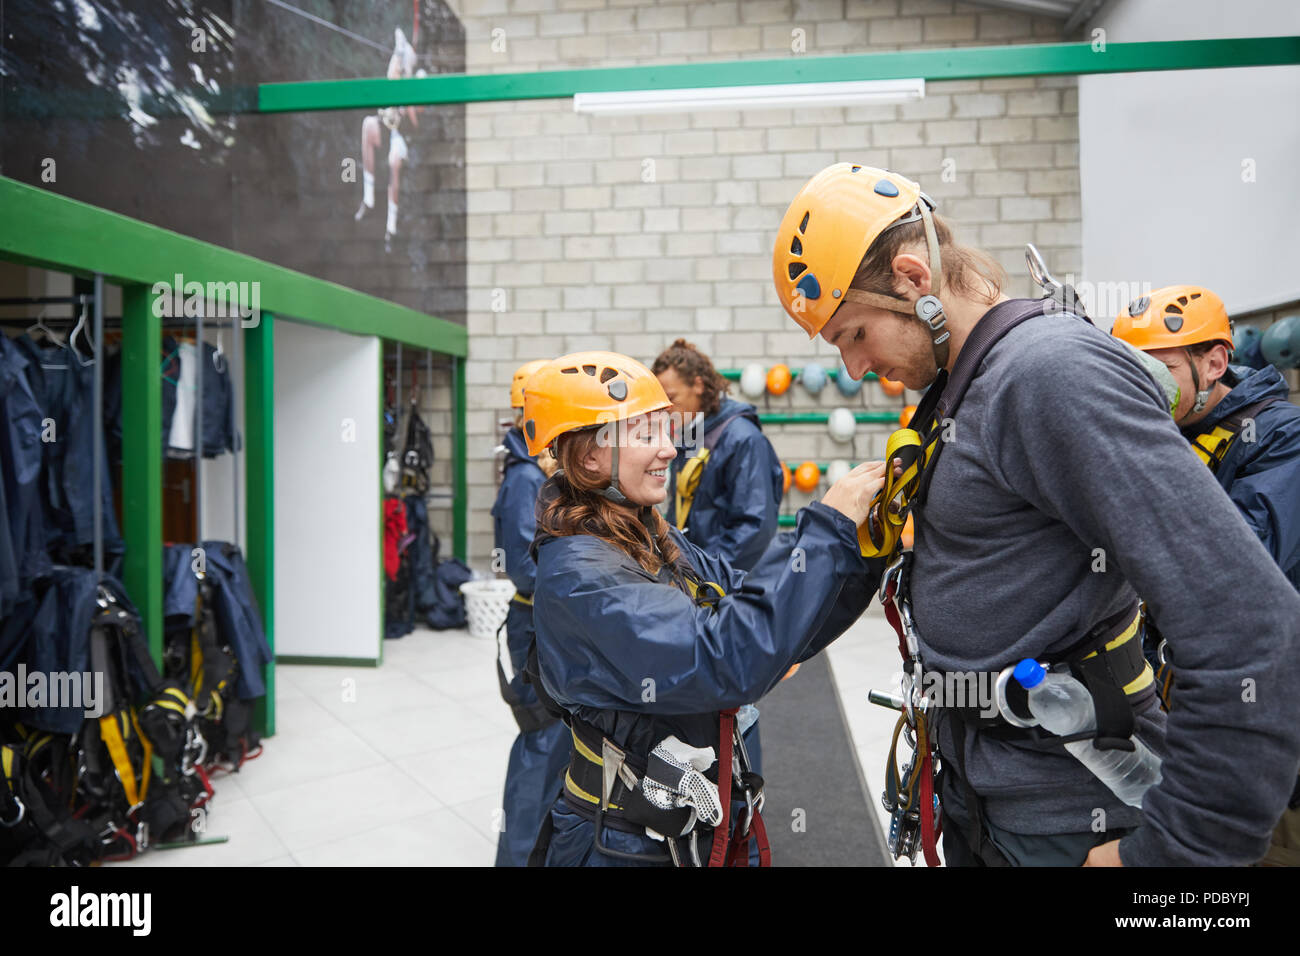 Woman helping man with zip line equipment Stock Photo